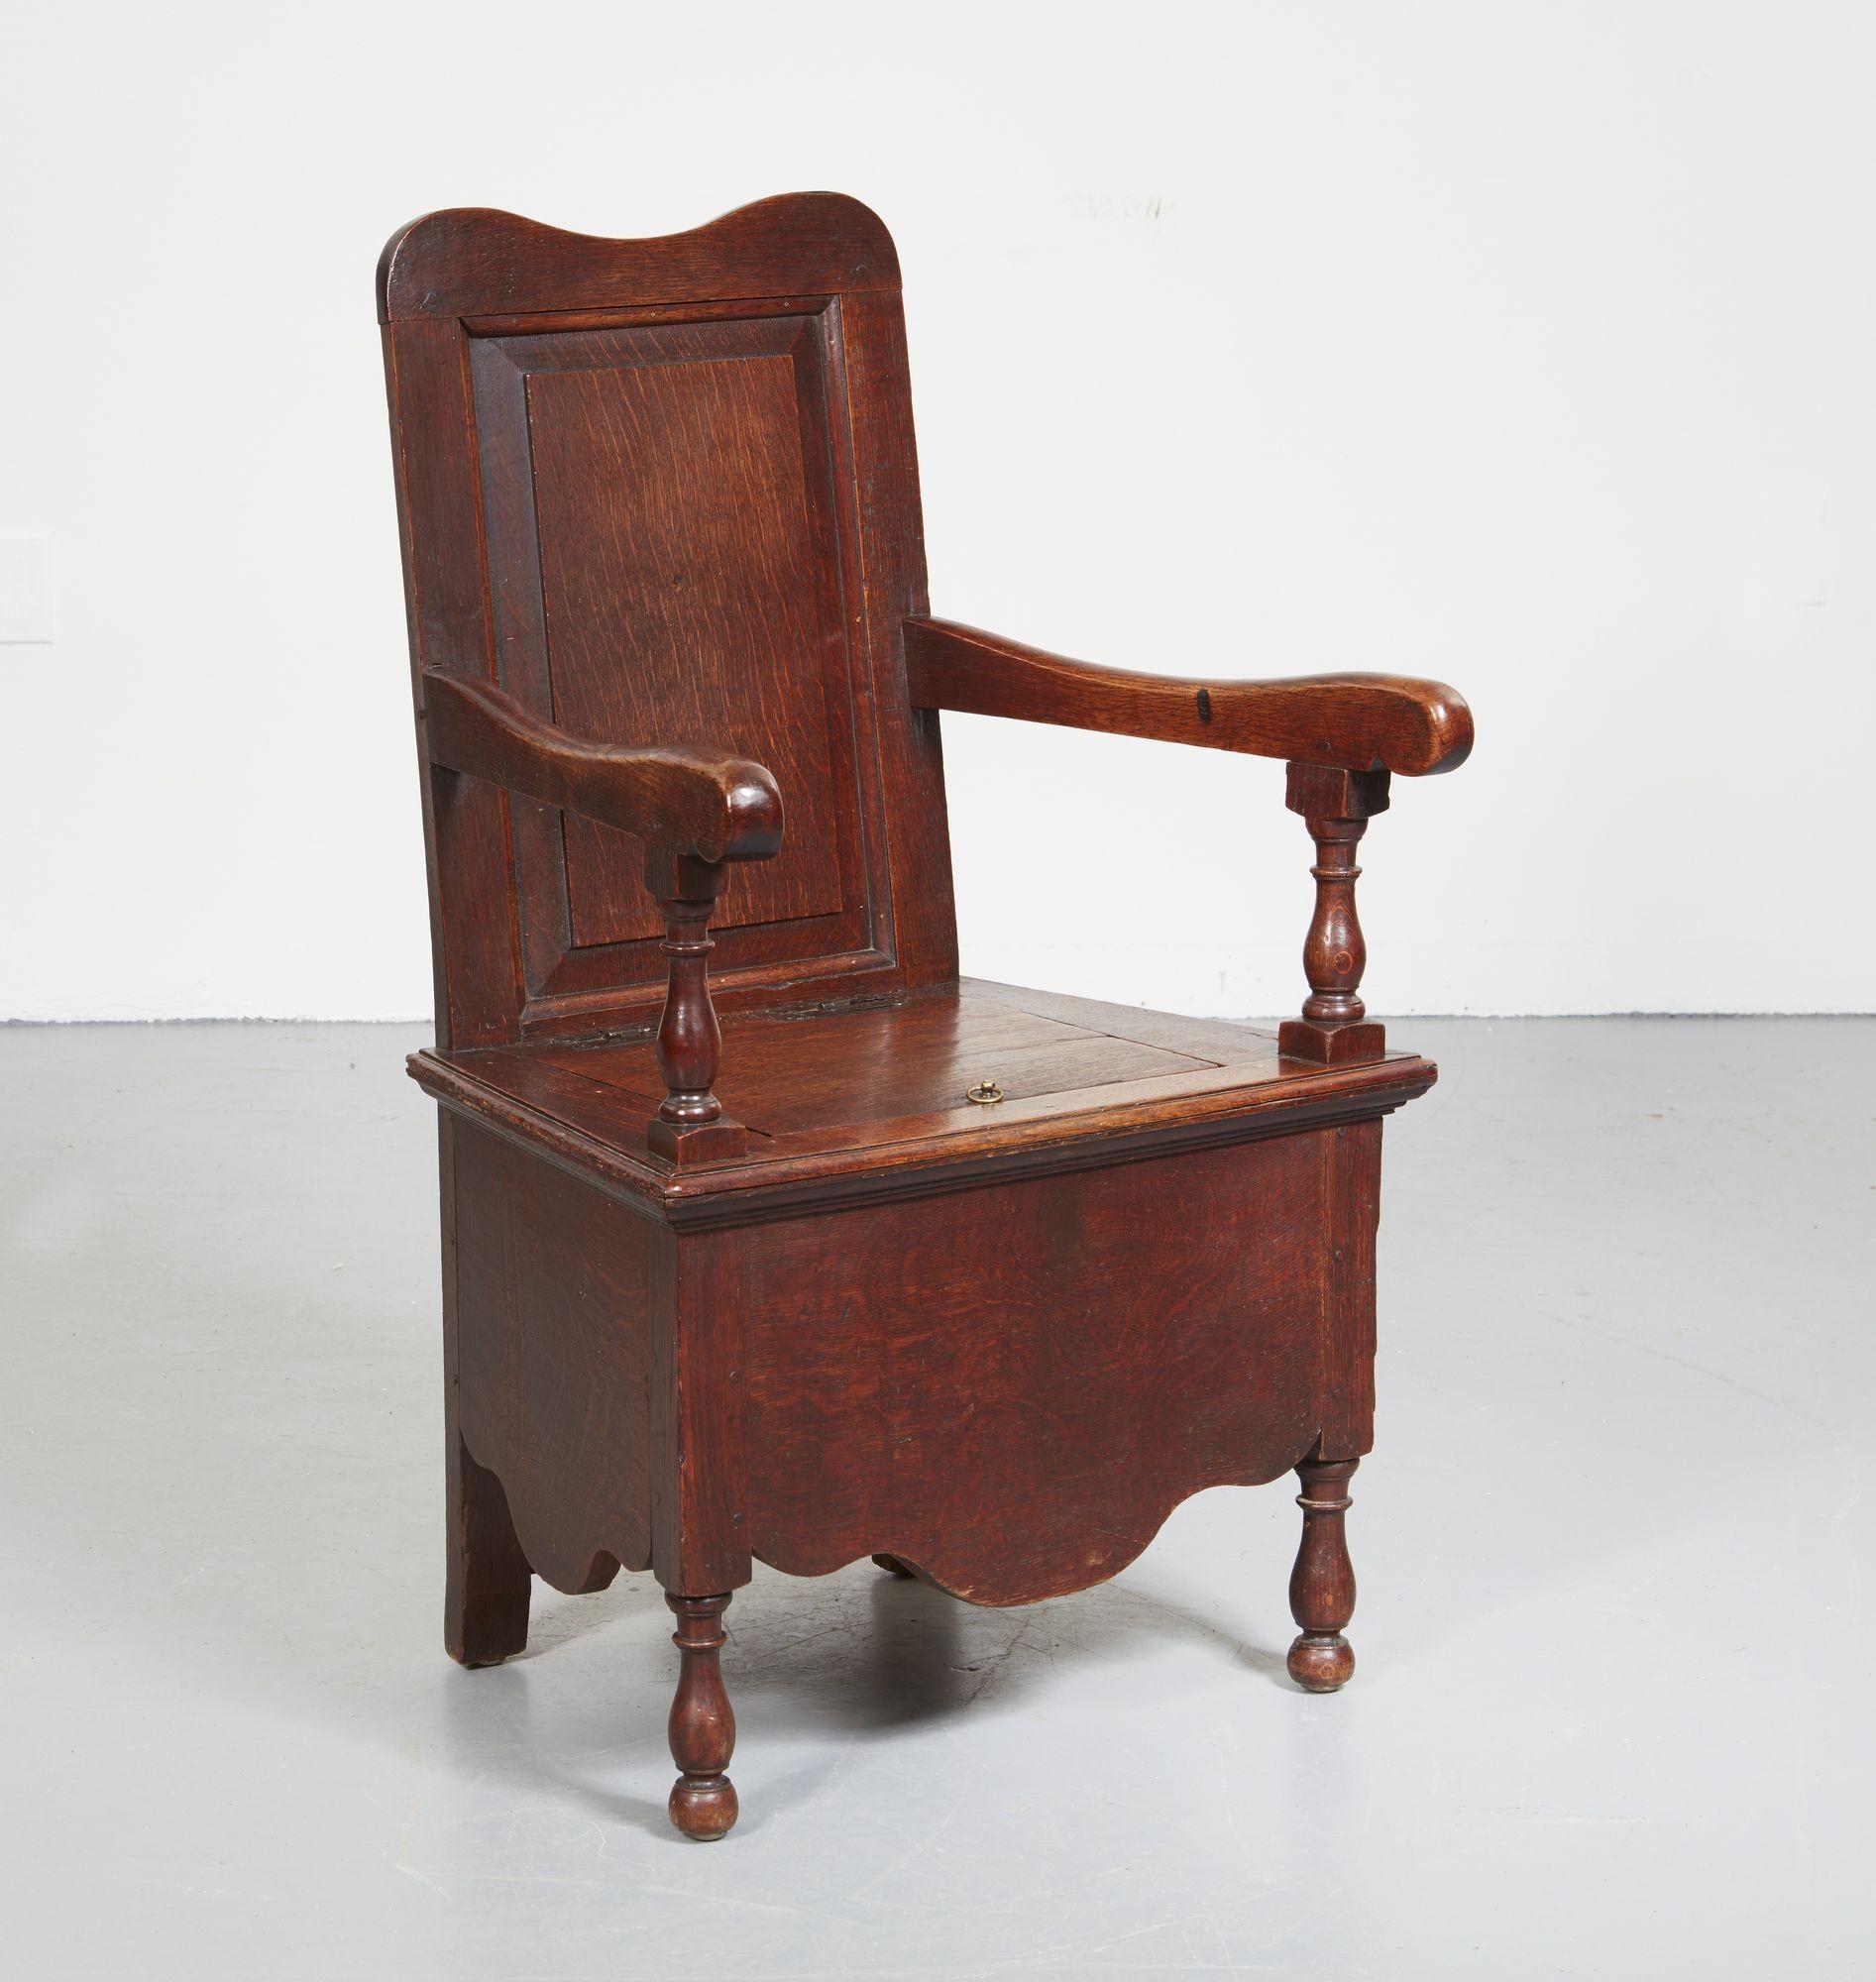 An 18th century oak commode armchair having solid back with reverse arched and central rectangular inset panel, solid sides and base with shaped aprons, over open curved arms on turned supports, lift top seat and standing on turned legs. Original